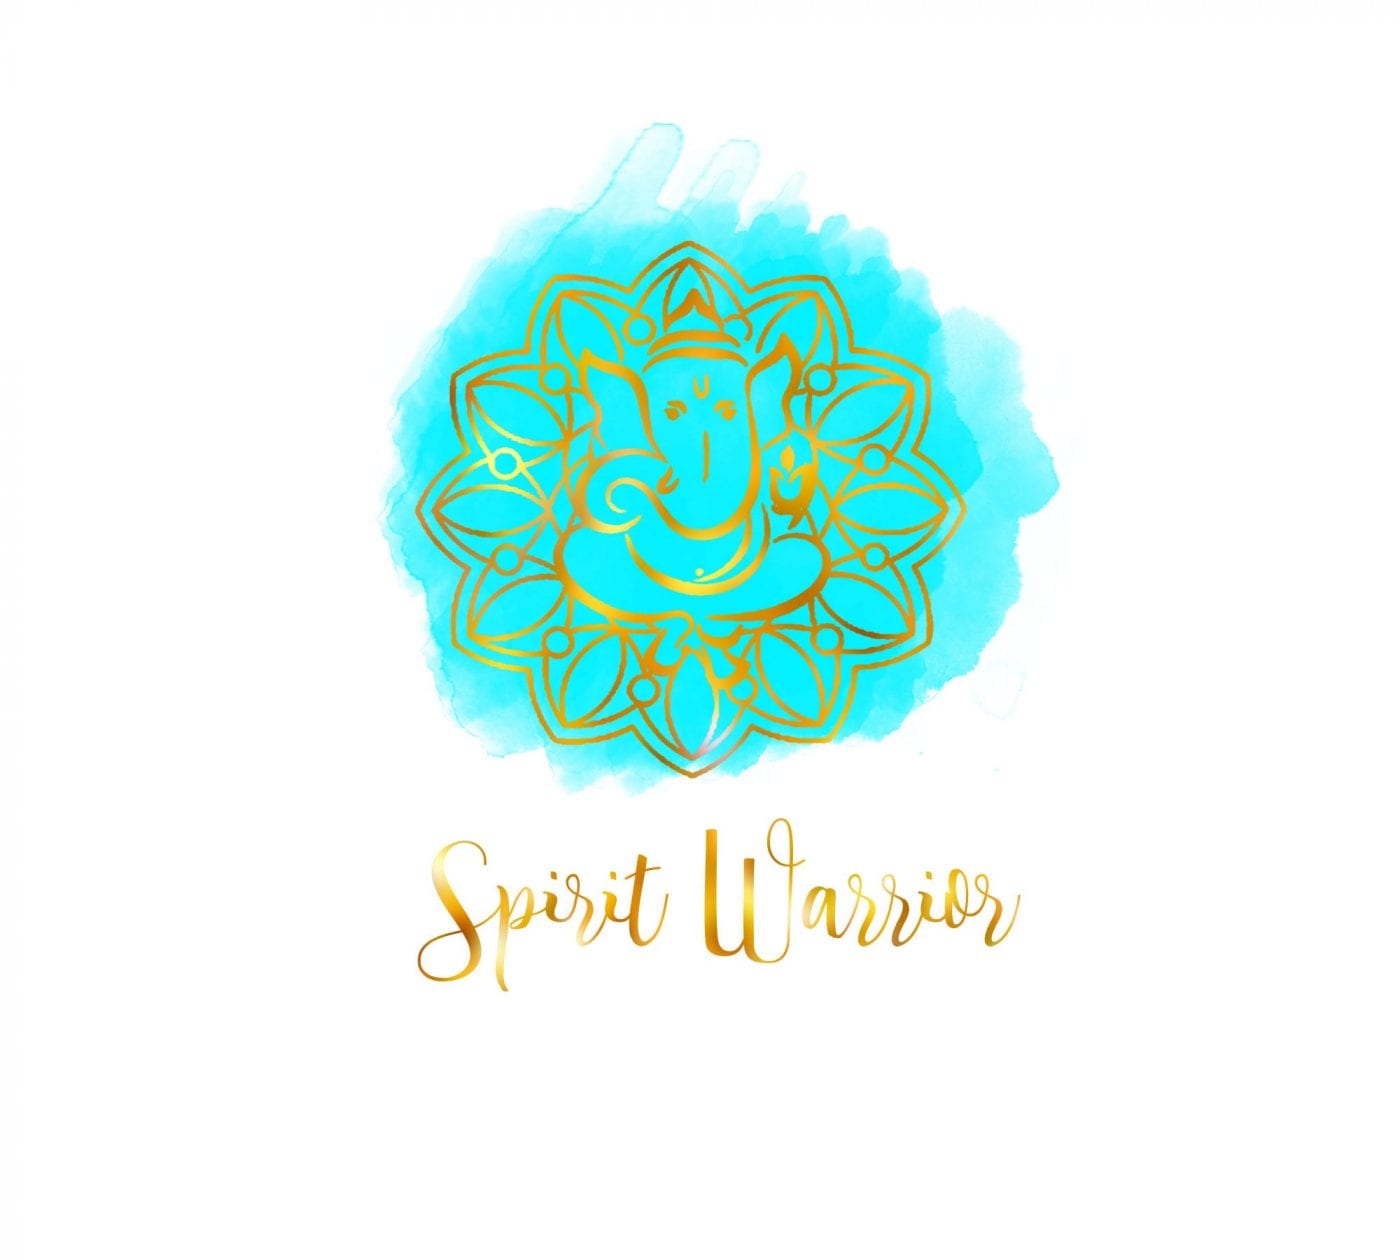 Spirit Warrior Nation Wants To Enhance Your Brightest & Best Self With Online Daily Meditations & More 